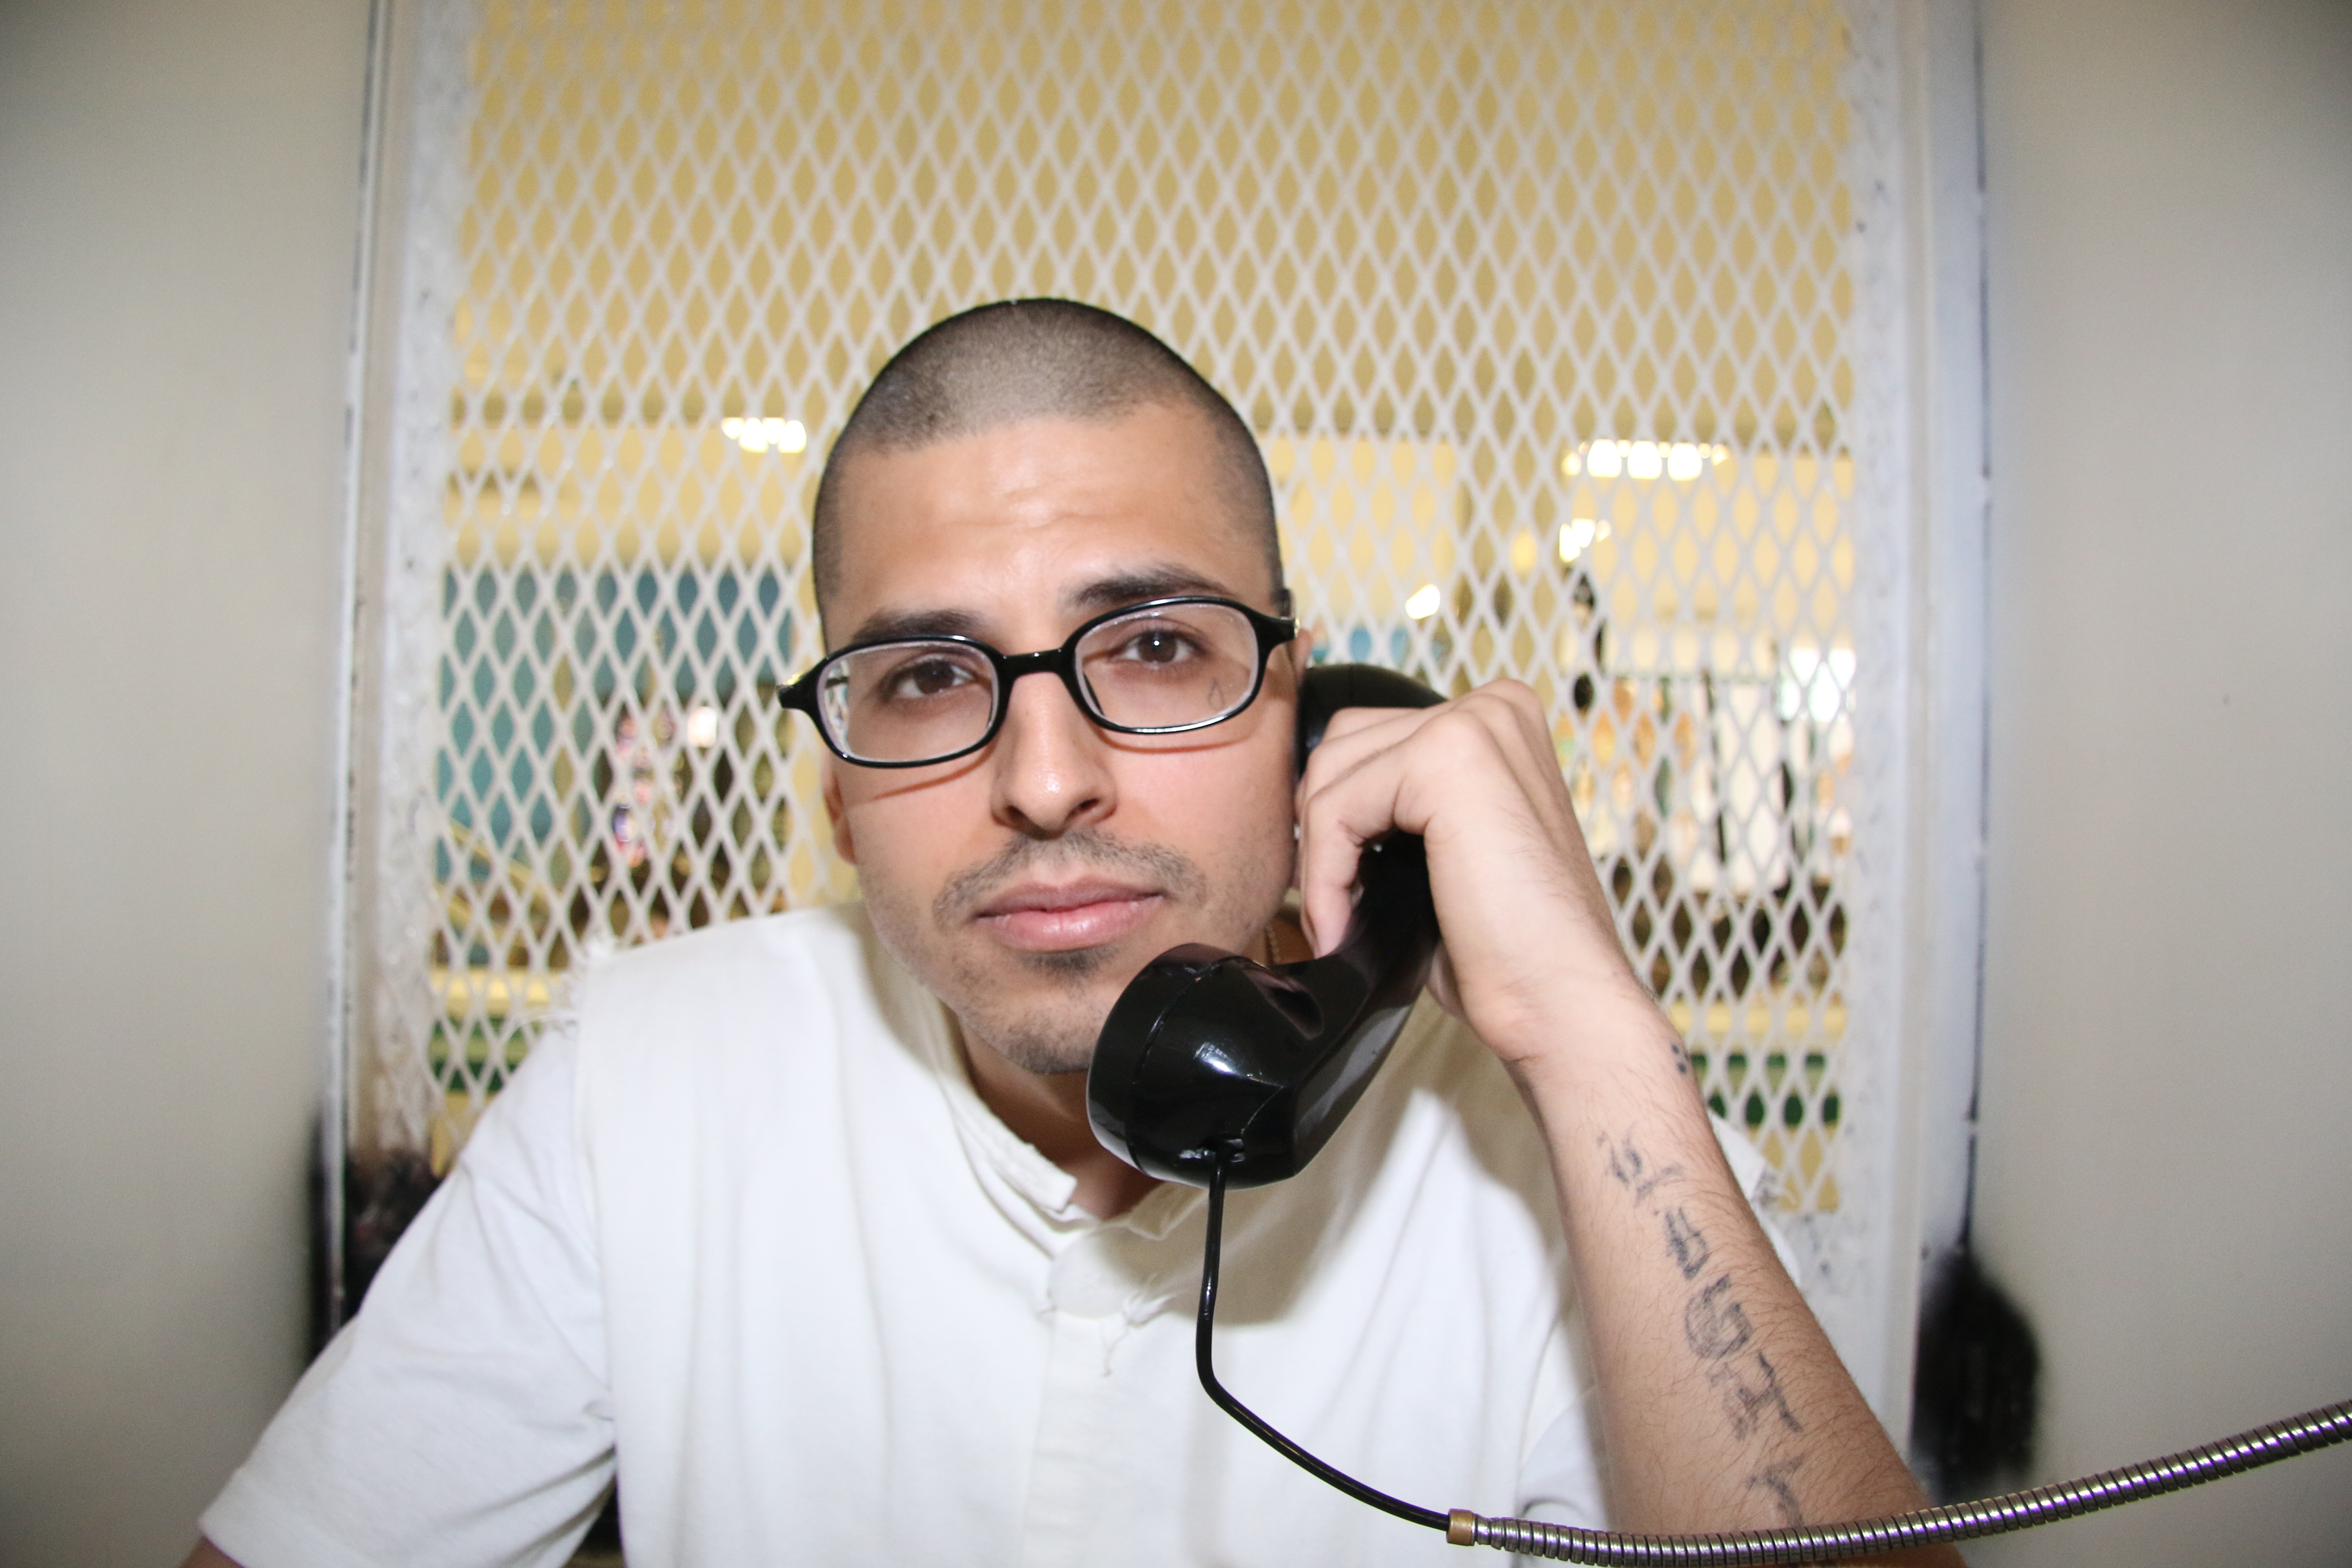 Texas inmate Daniel Lee Lopez wants to die, but lawyers try to halt execution - CBS News5472 x 3648